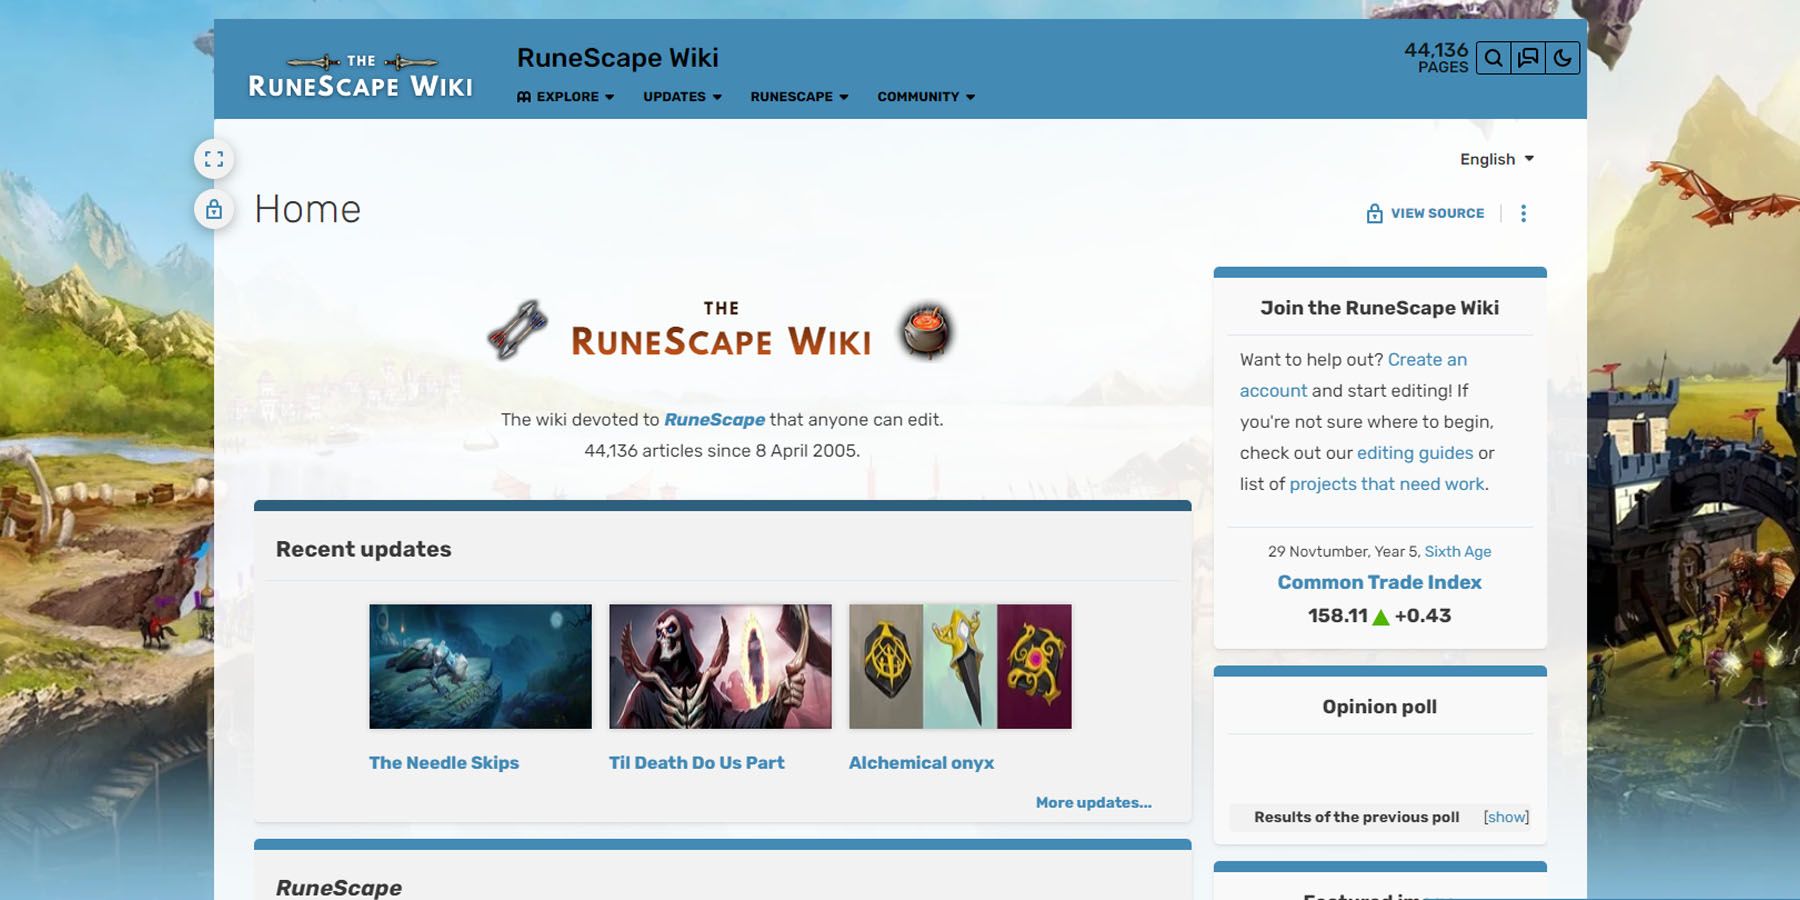 The RS Wiki